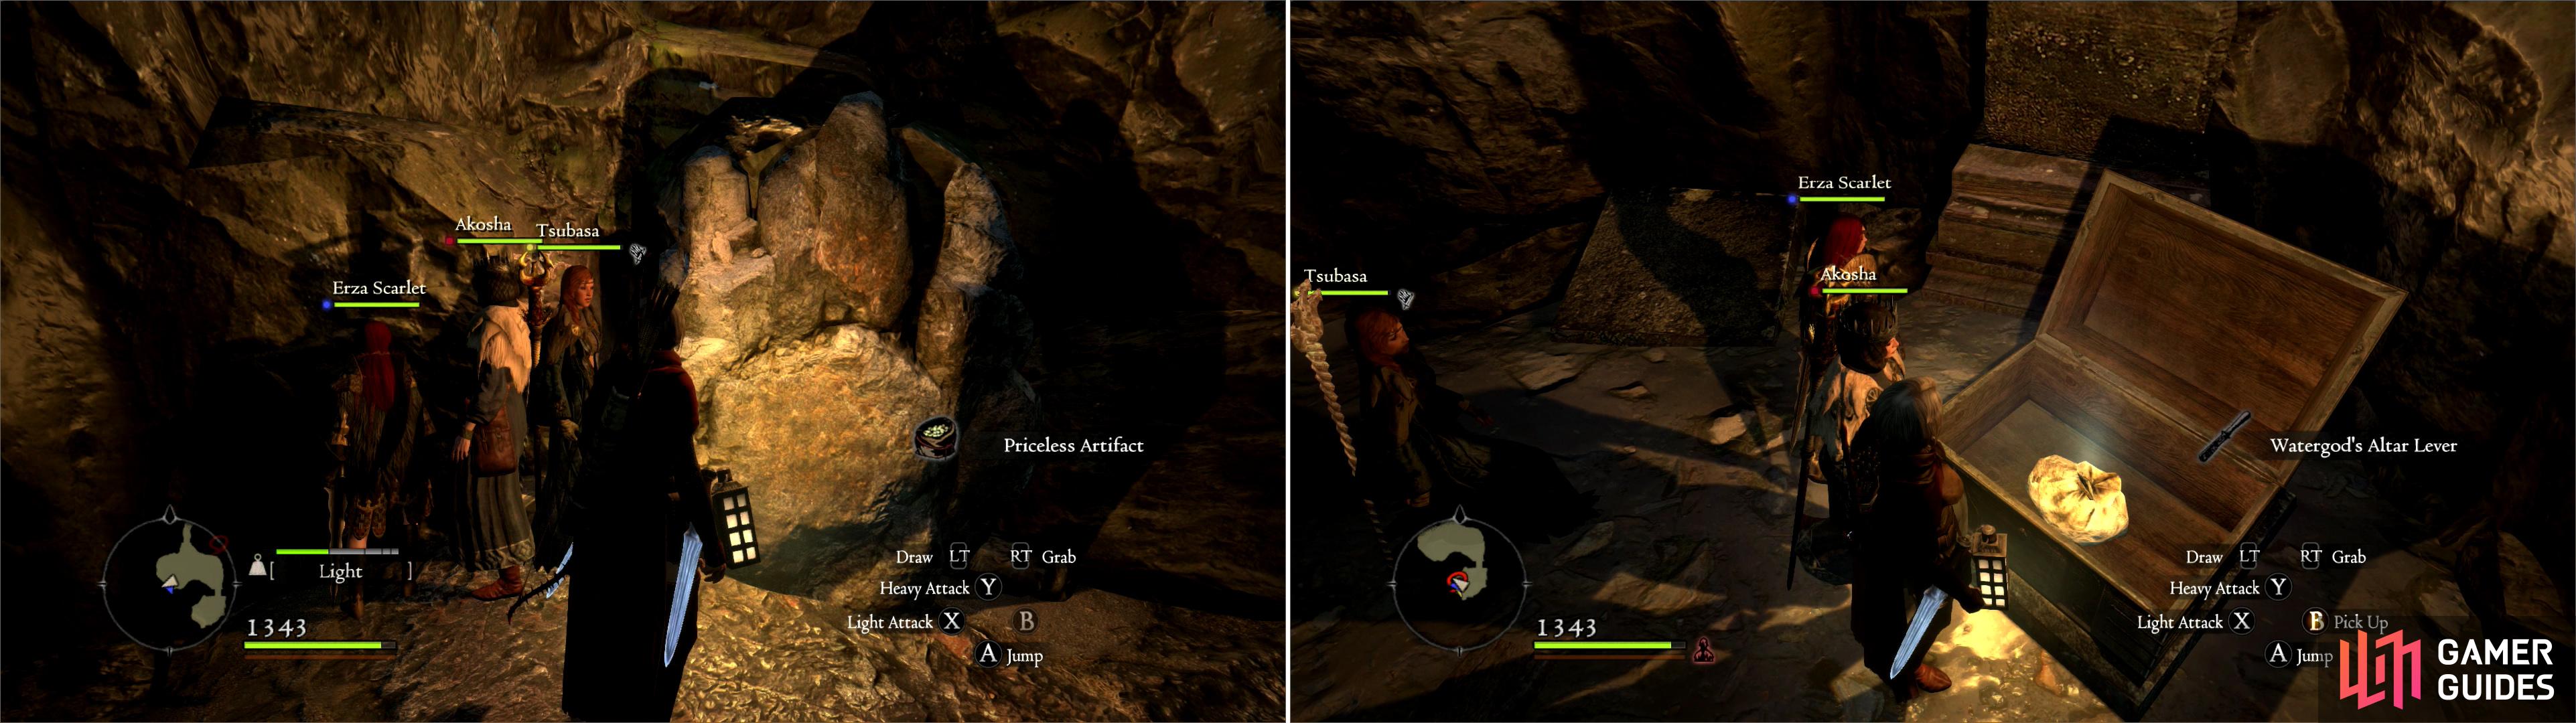 In the Saurian cave you’ll find an ore vein which can yield Priceless Artifacts (left). Pick up the Watergod’s Altar Lever, which is the key to progressing deeper into the temple (right).